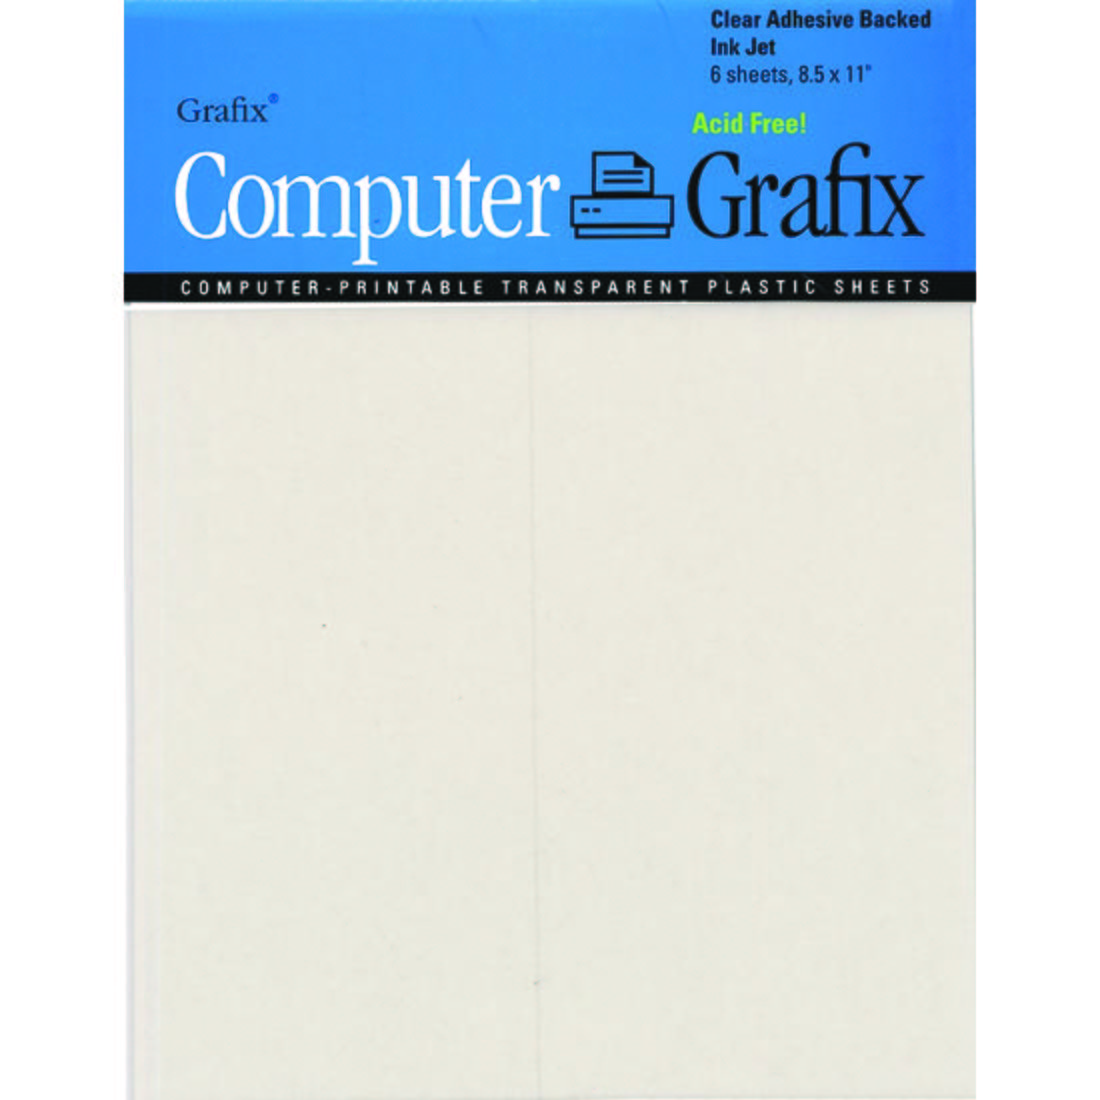 Grafix Clear Adhesive Backed Ink Jet Computer-Printable Transparent Plastic Sheets